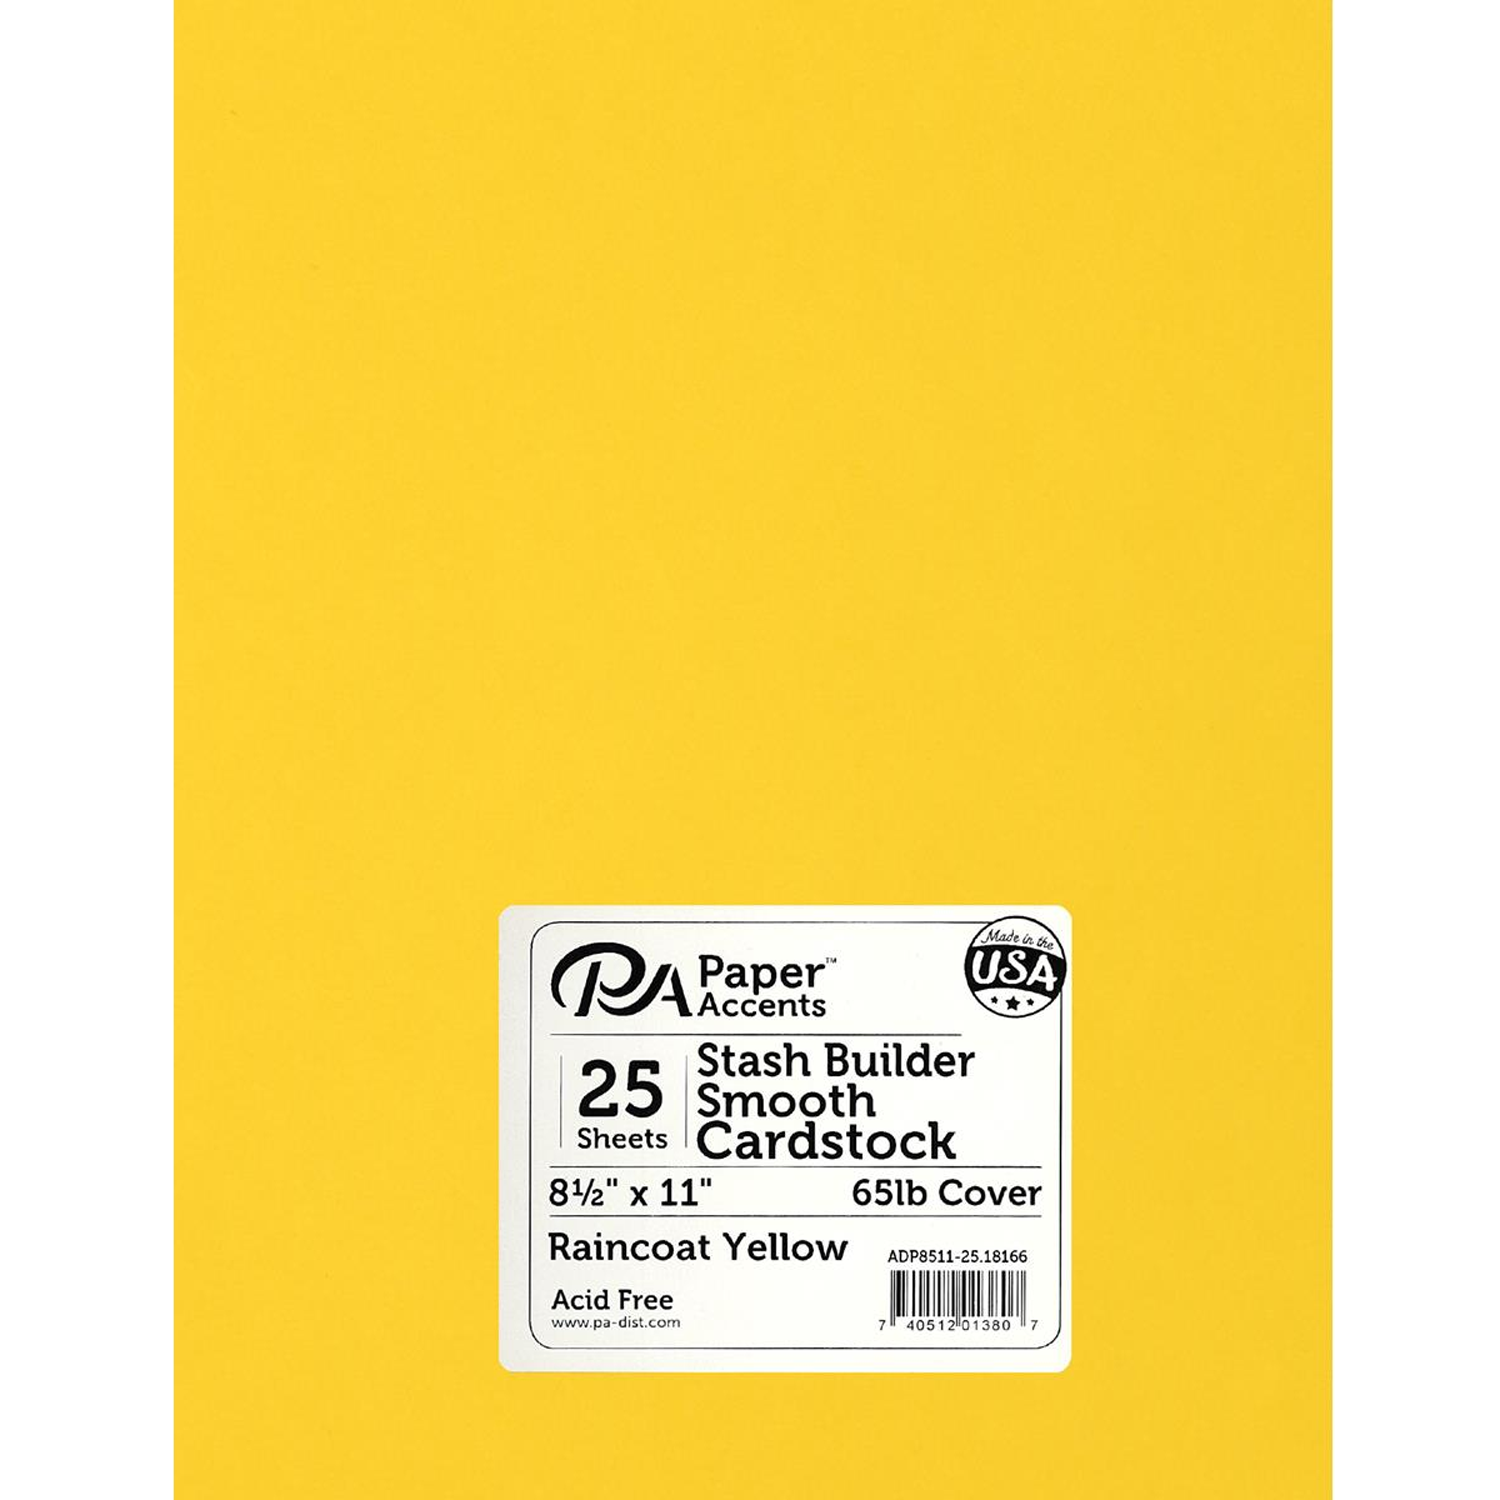 PA Paper Accents Stash Builder Cardstock 8.5 x 11 Raincoat Yellow, 65lb colored  cardstock paper for card making, scrapbooking, printing, quilling and  crafts, 25 piece pack 